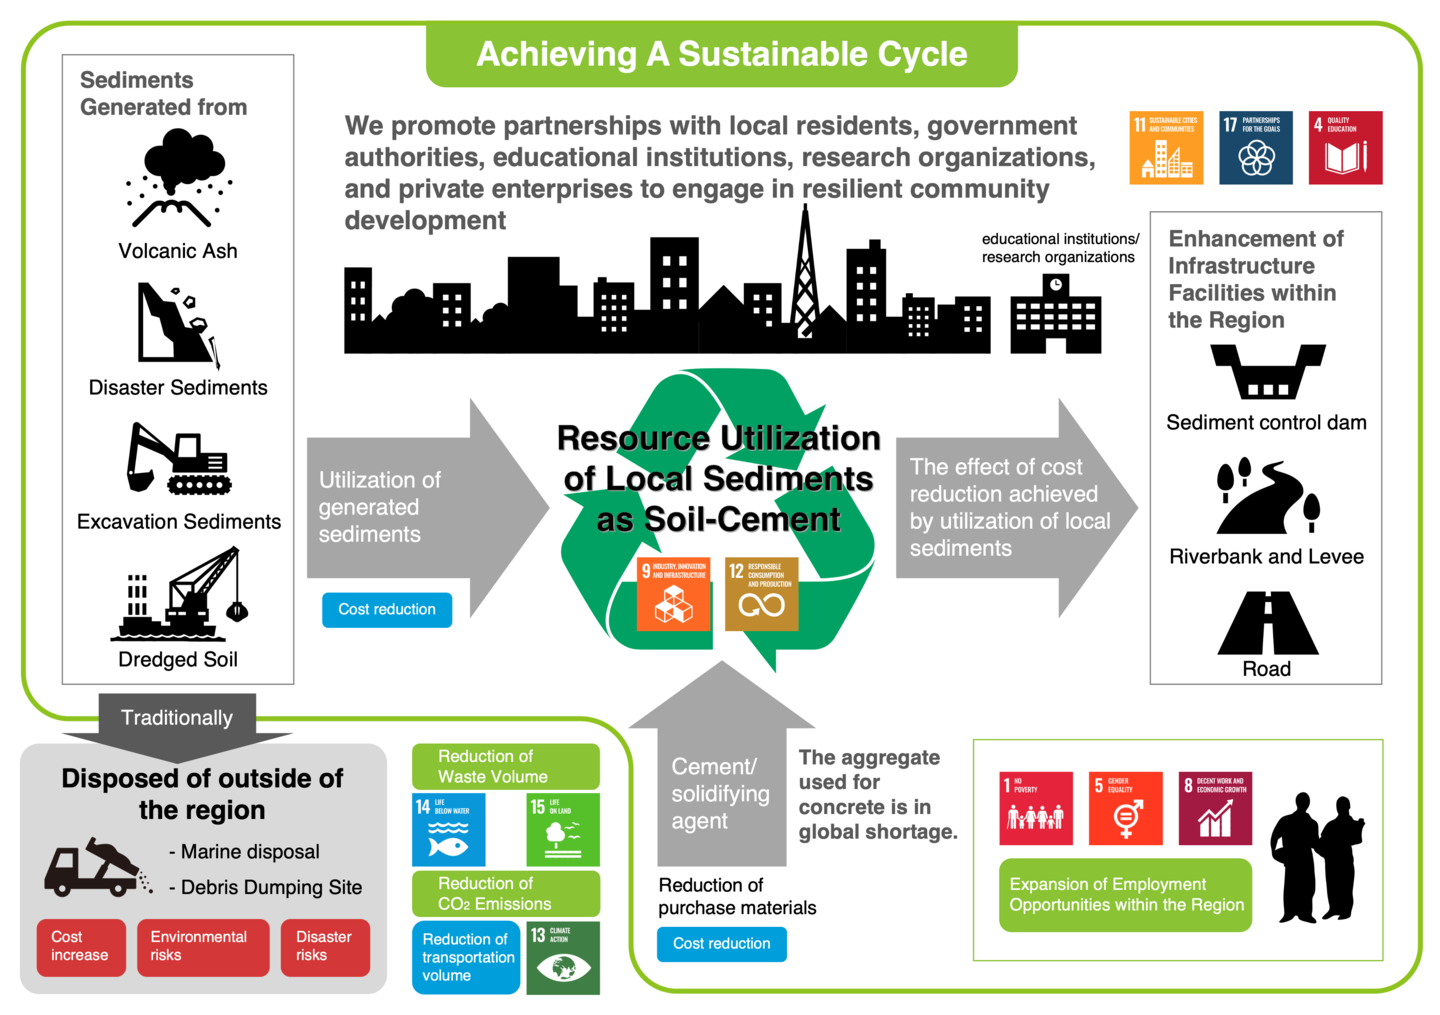 Illustration of achieving a sustainable cycle by INVAX Group